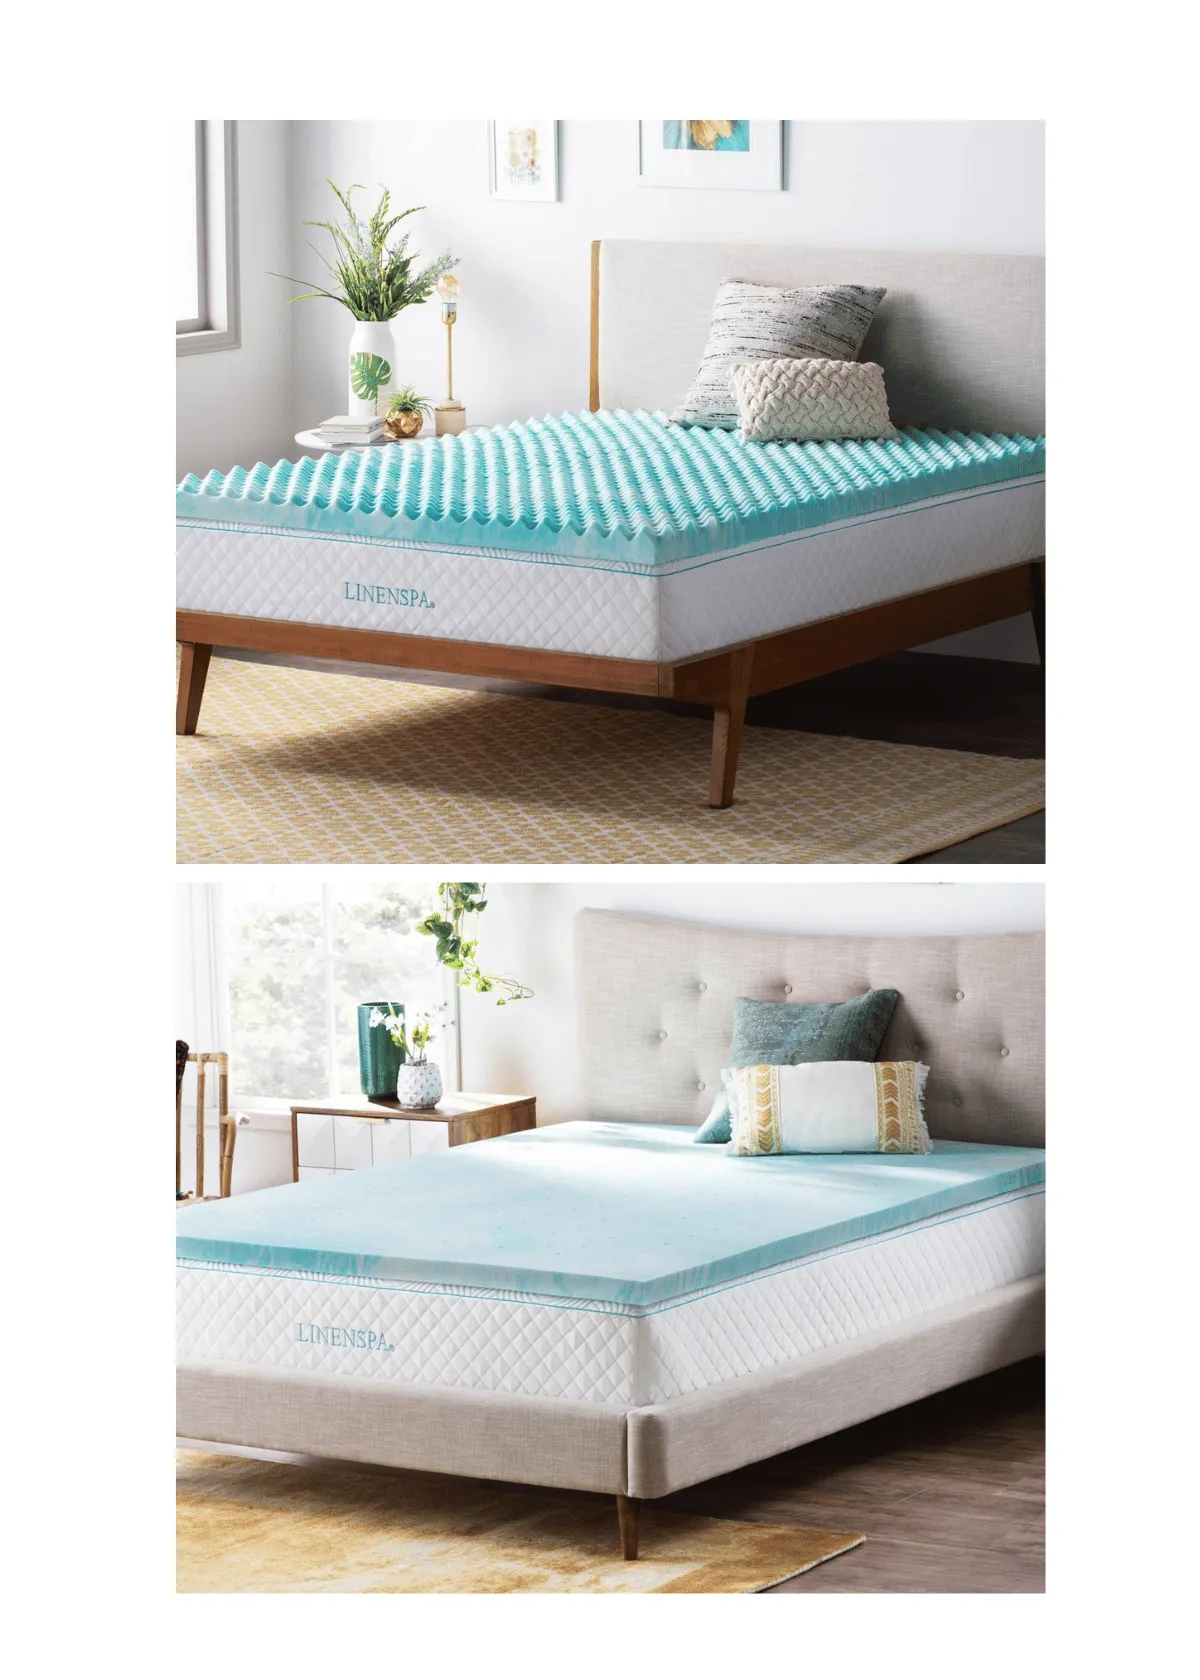 "Upgrade to a Linenspa Mattress Topper for Ultimate Comfort"